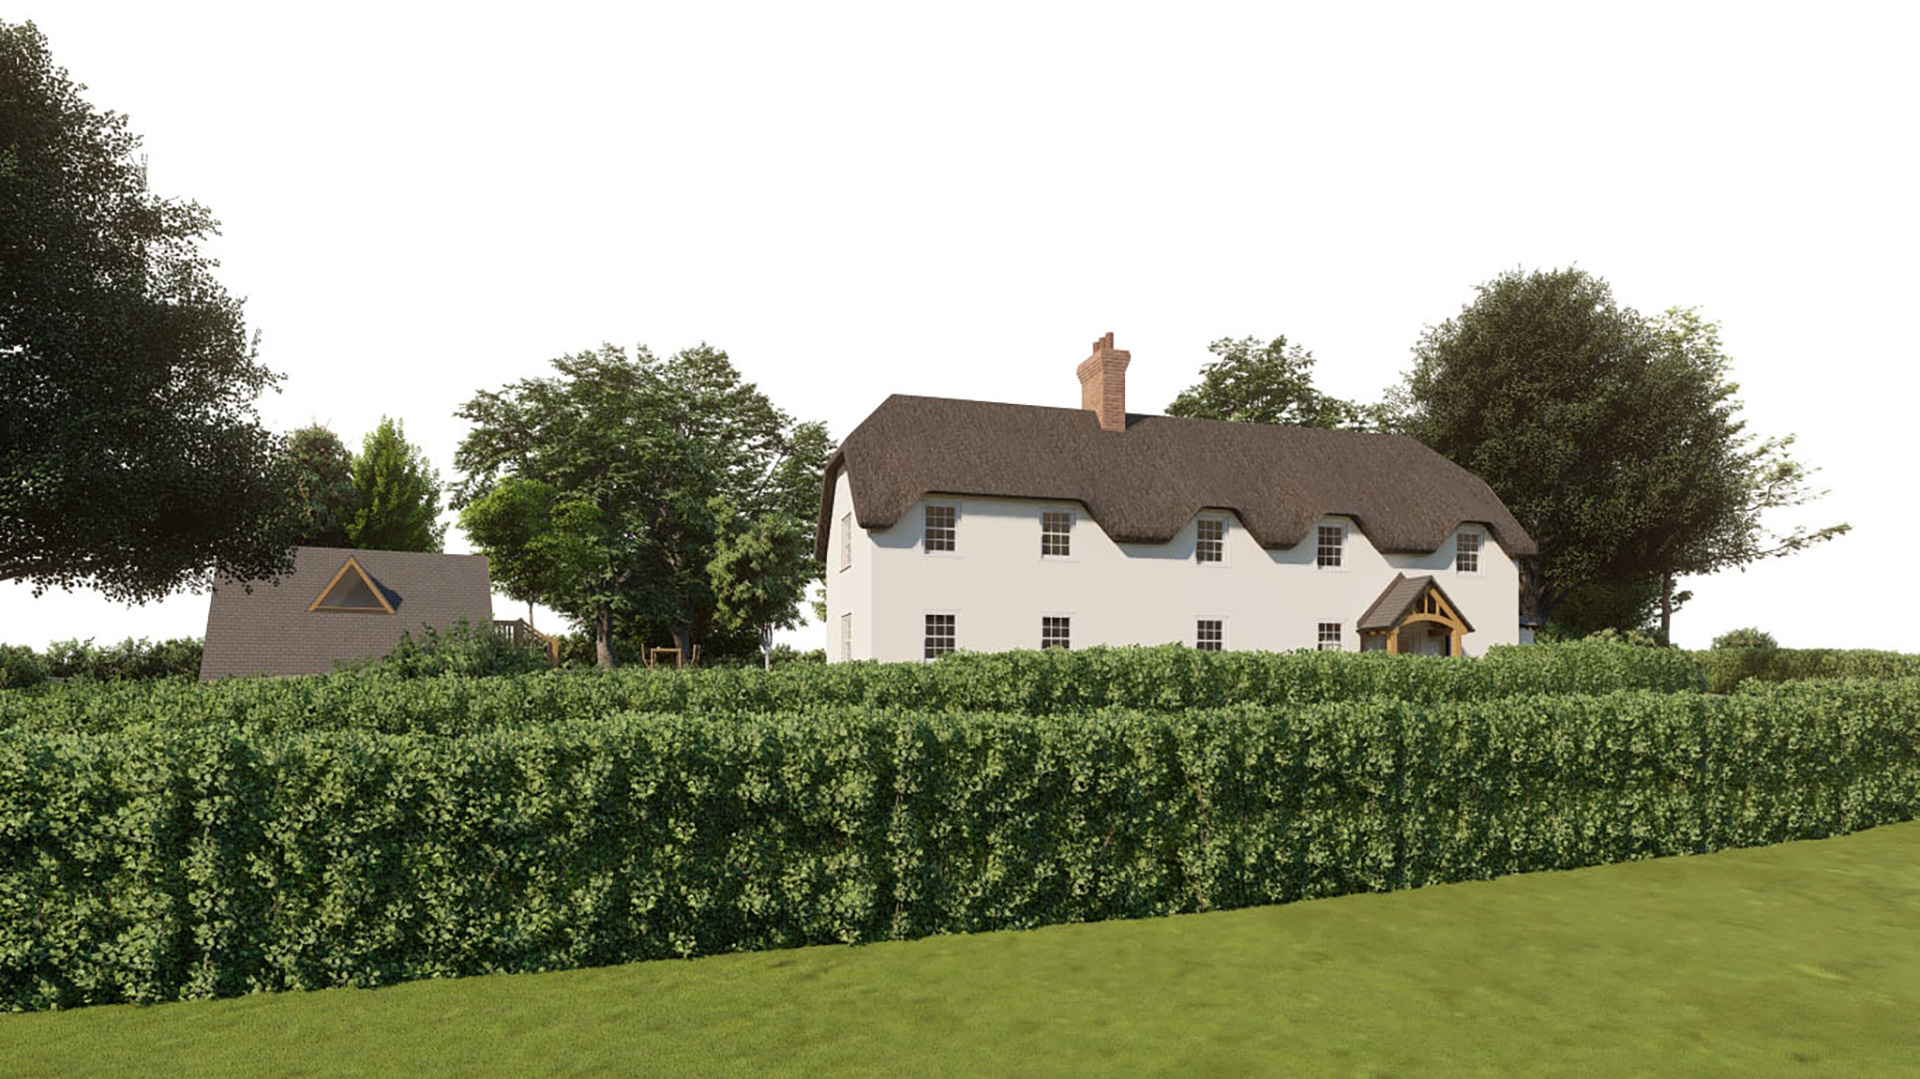 visual of front view of large thatched house behind hedge